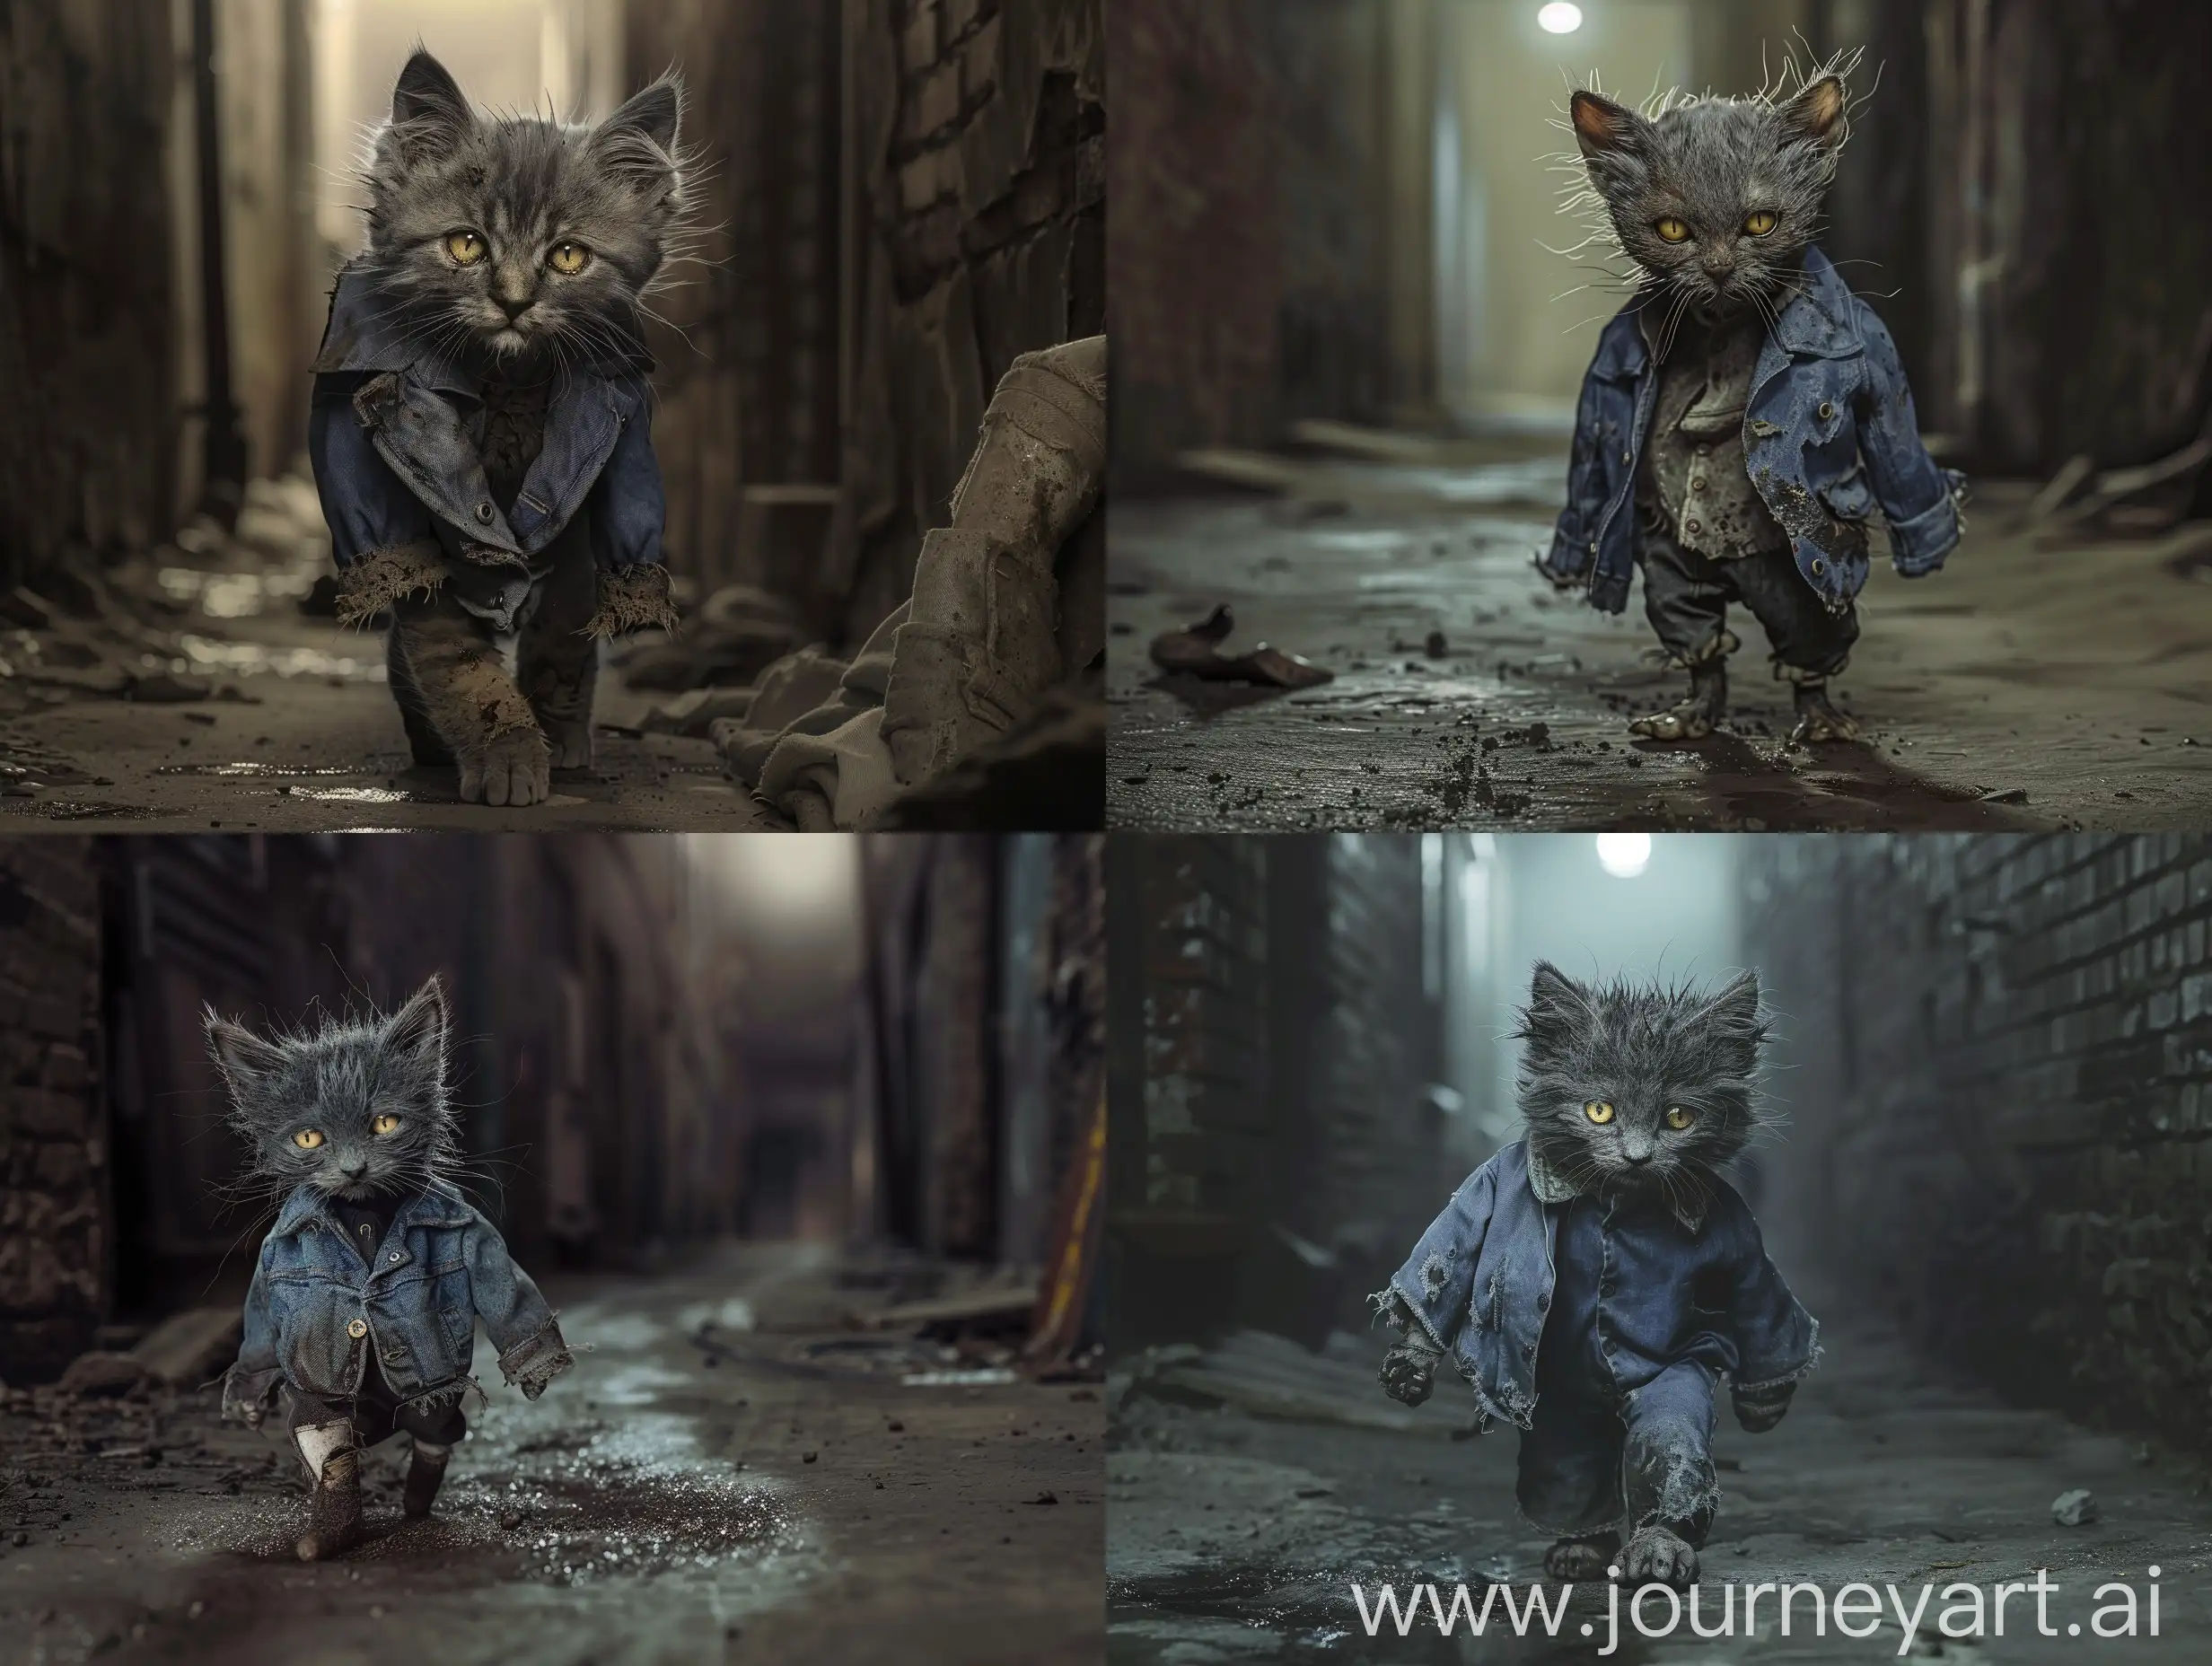 Lonely-Anthropomorphic-Cat-in-Tattered-Clothes-Walking-Alone-in-Desolate-Alley-at-Night